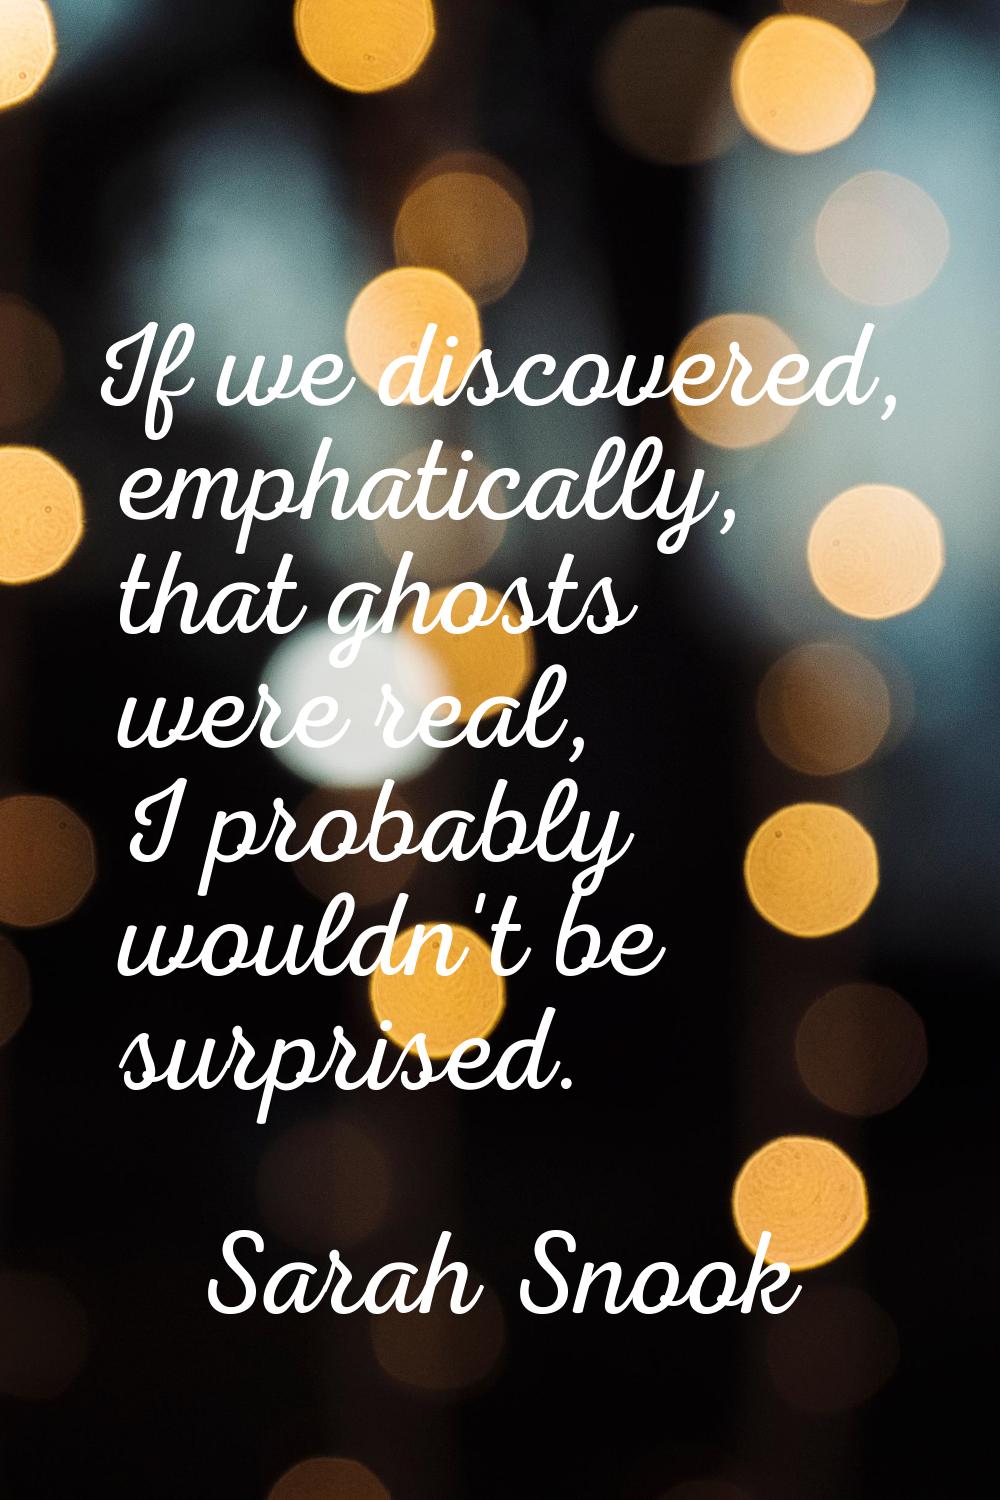 If we discovered, emphatically, that ghosts were real, I probably wouldn't be surprised.